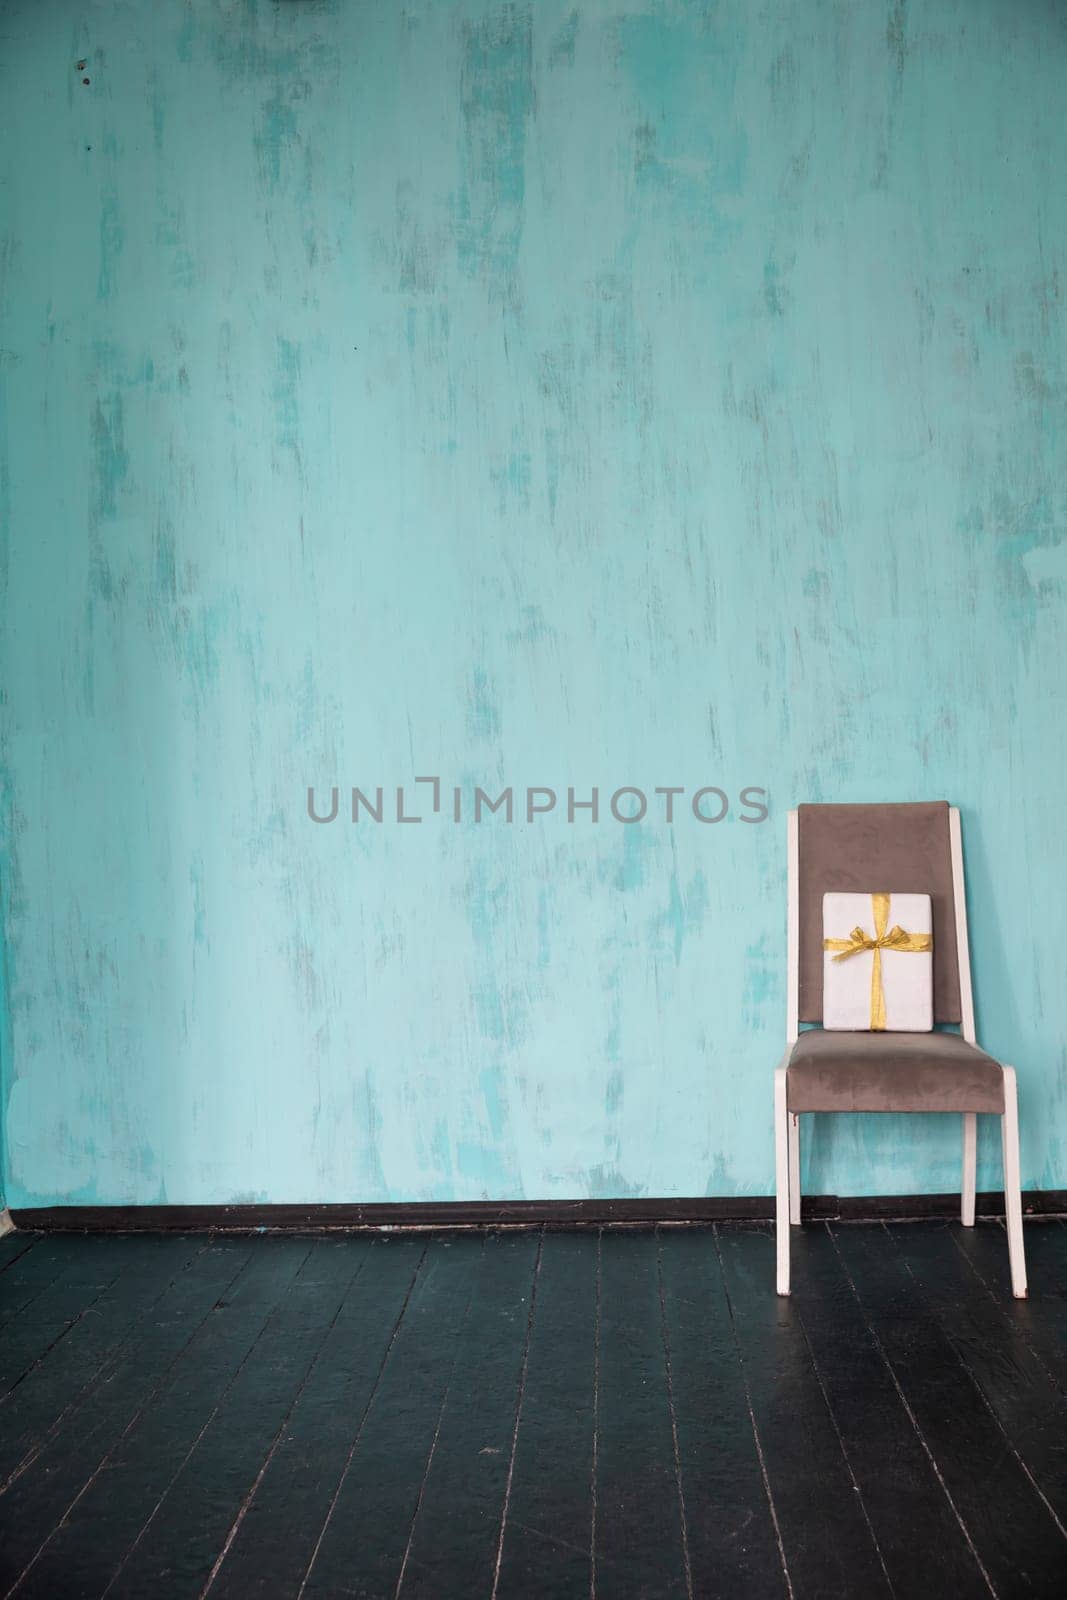 One Chair With Holiday Gift Against Bright Colored Wall by Simakov